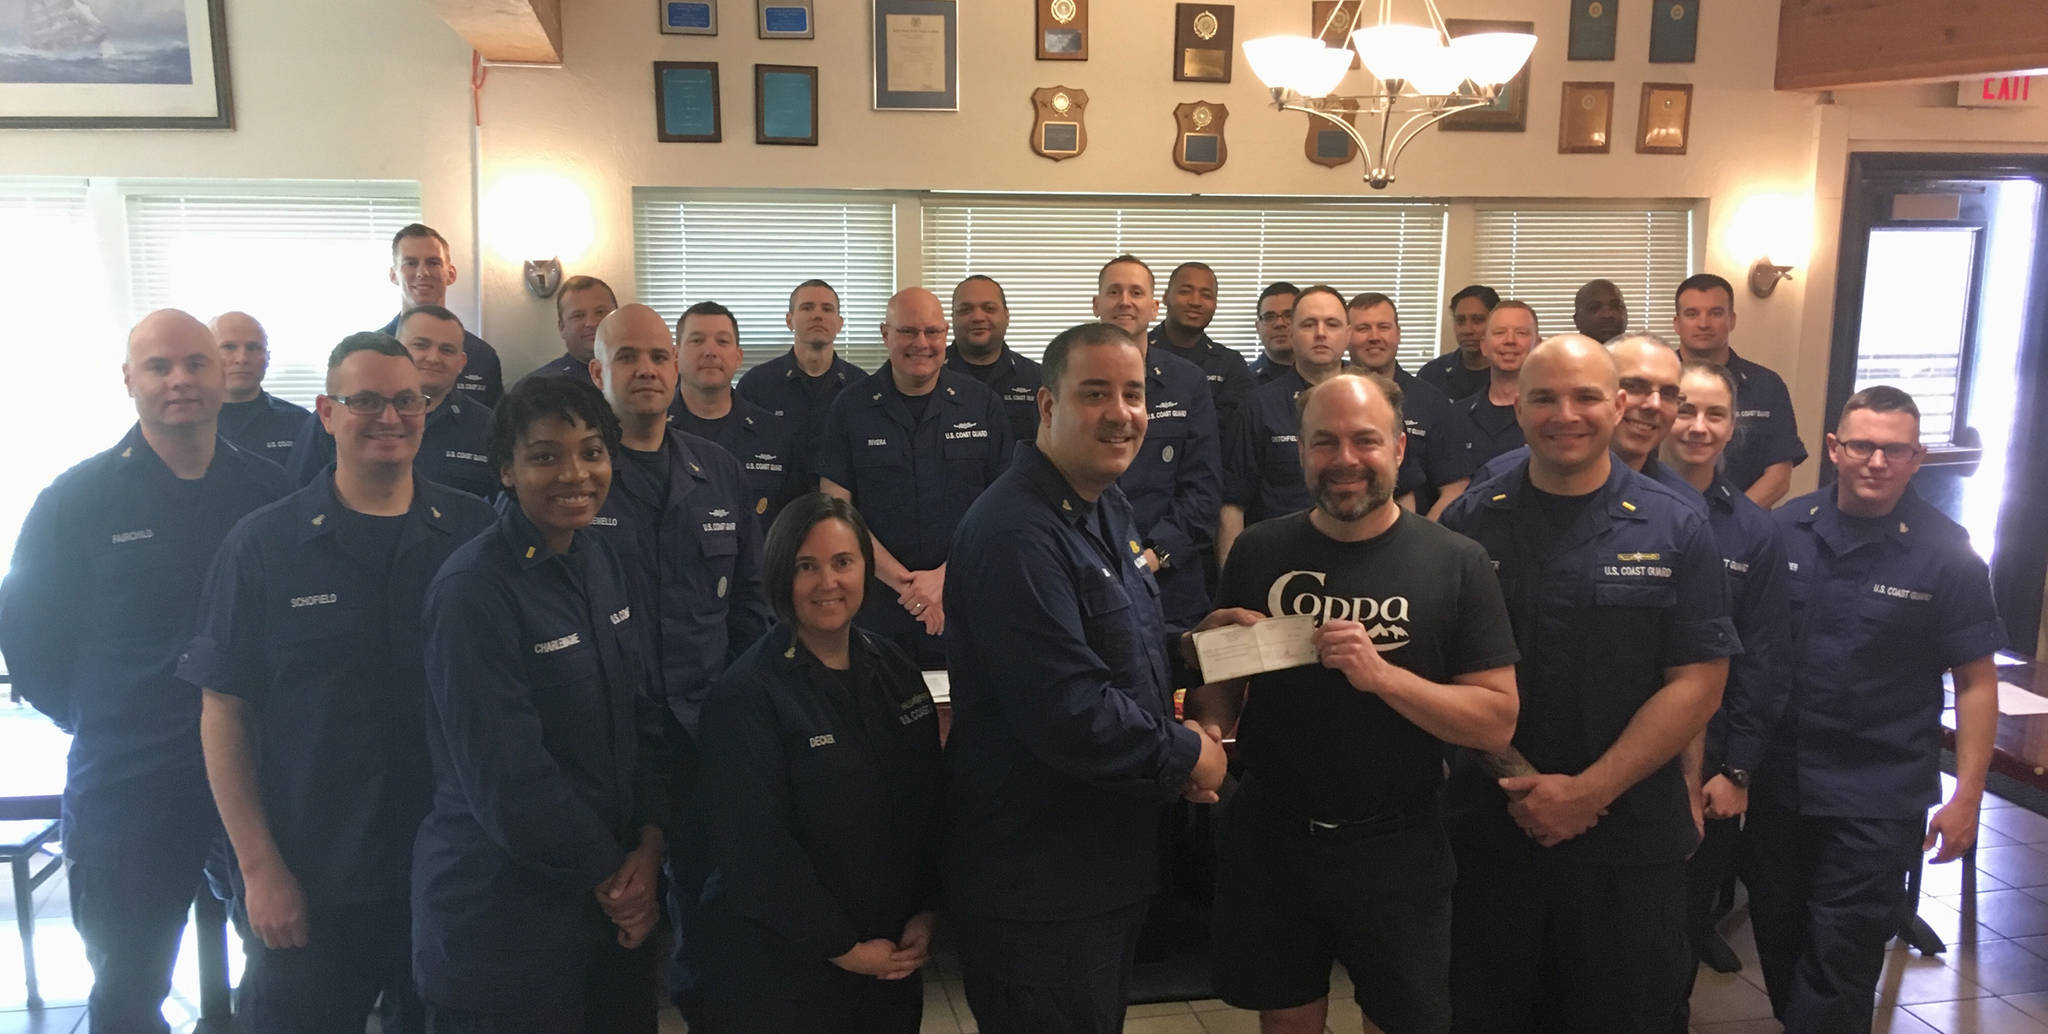 Coppa co-owner Marc Wheeler presents a check for $500 to OSC Robert Luna, head of the U.S. Coast Guard Chief Petty Officers Association in Juneau. Also present is the entire chief’s mess. (Courtesy Photo)